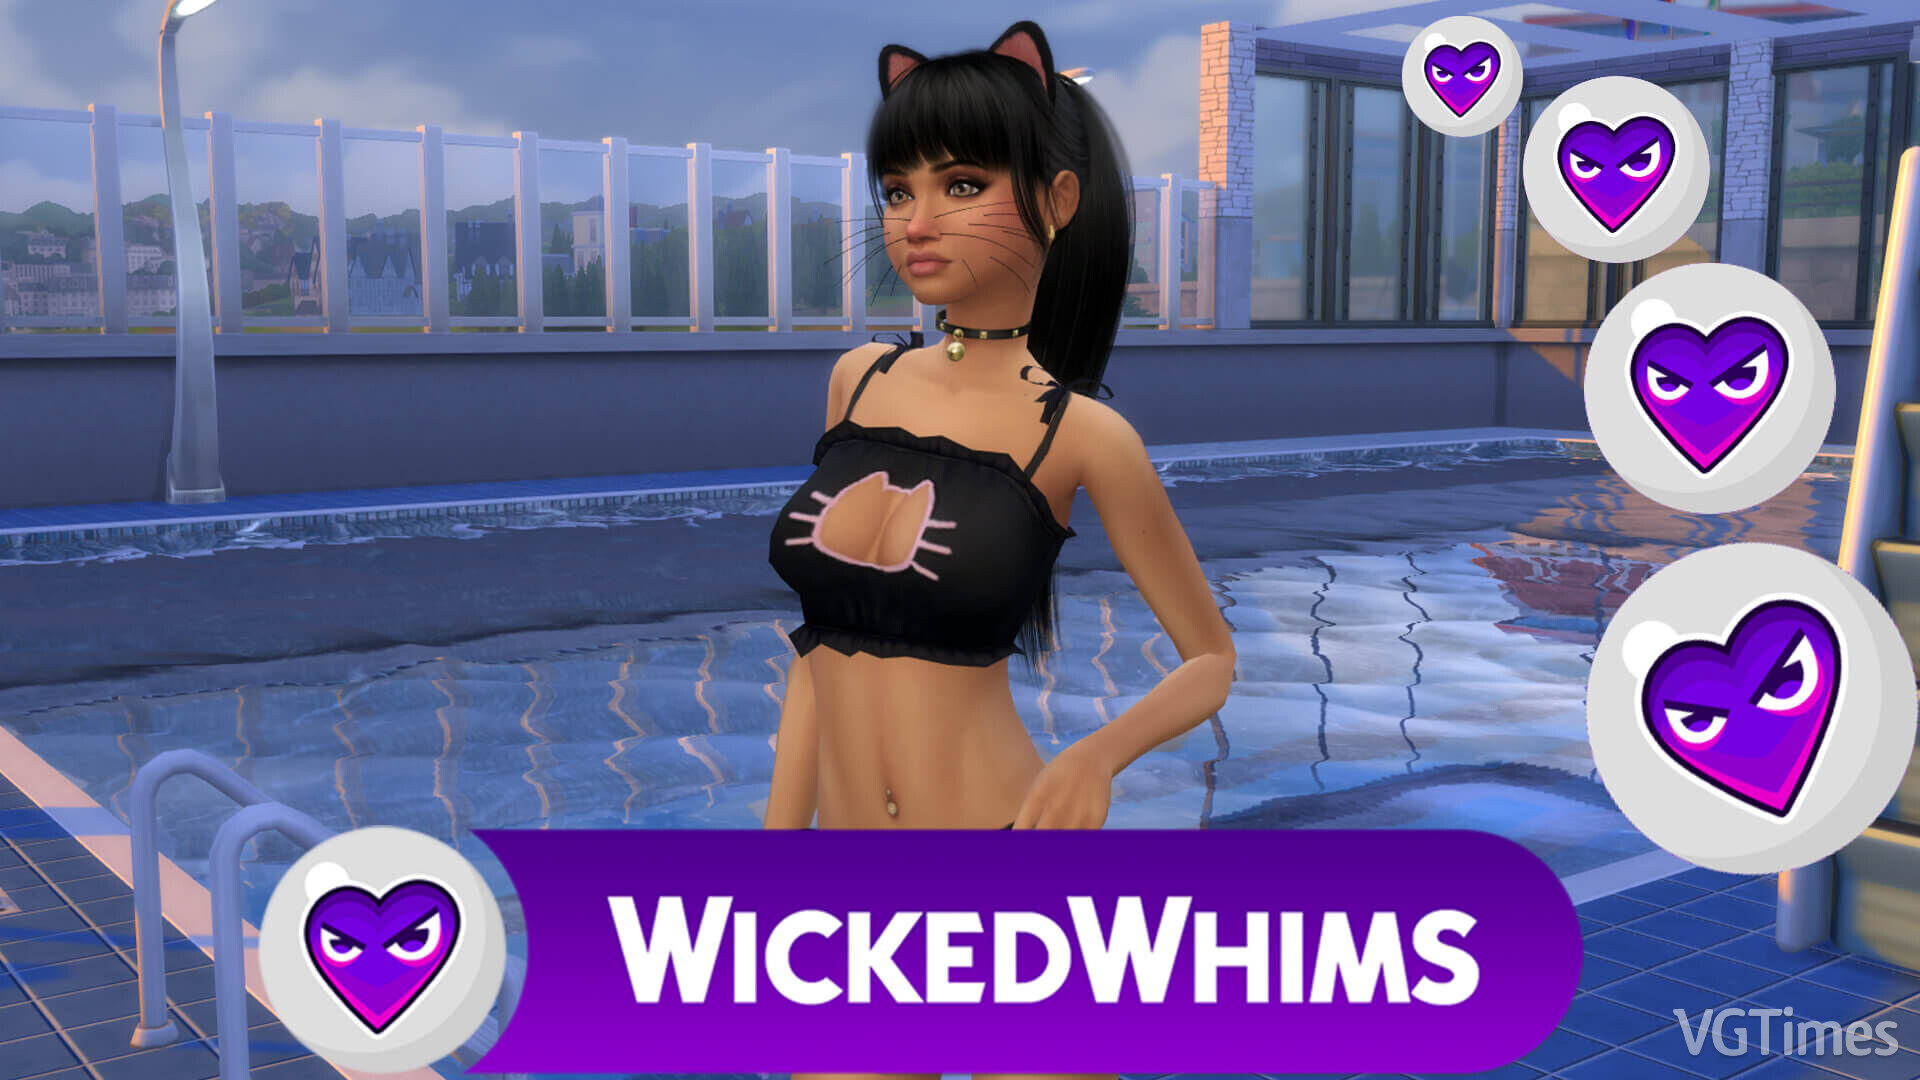 Wicked whims sims 4 русификатор последняя версия